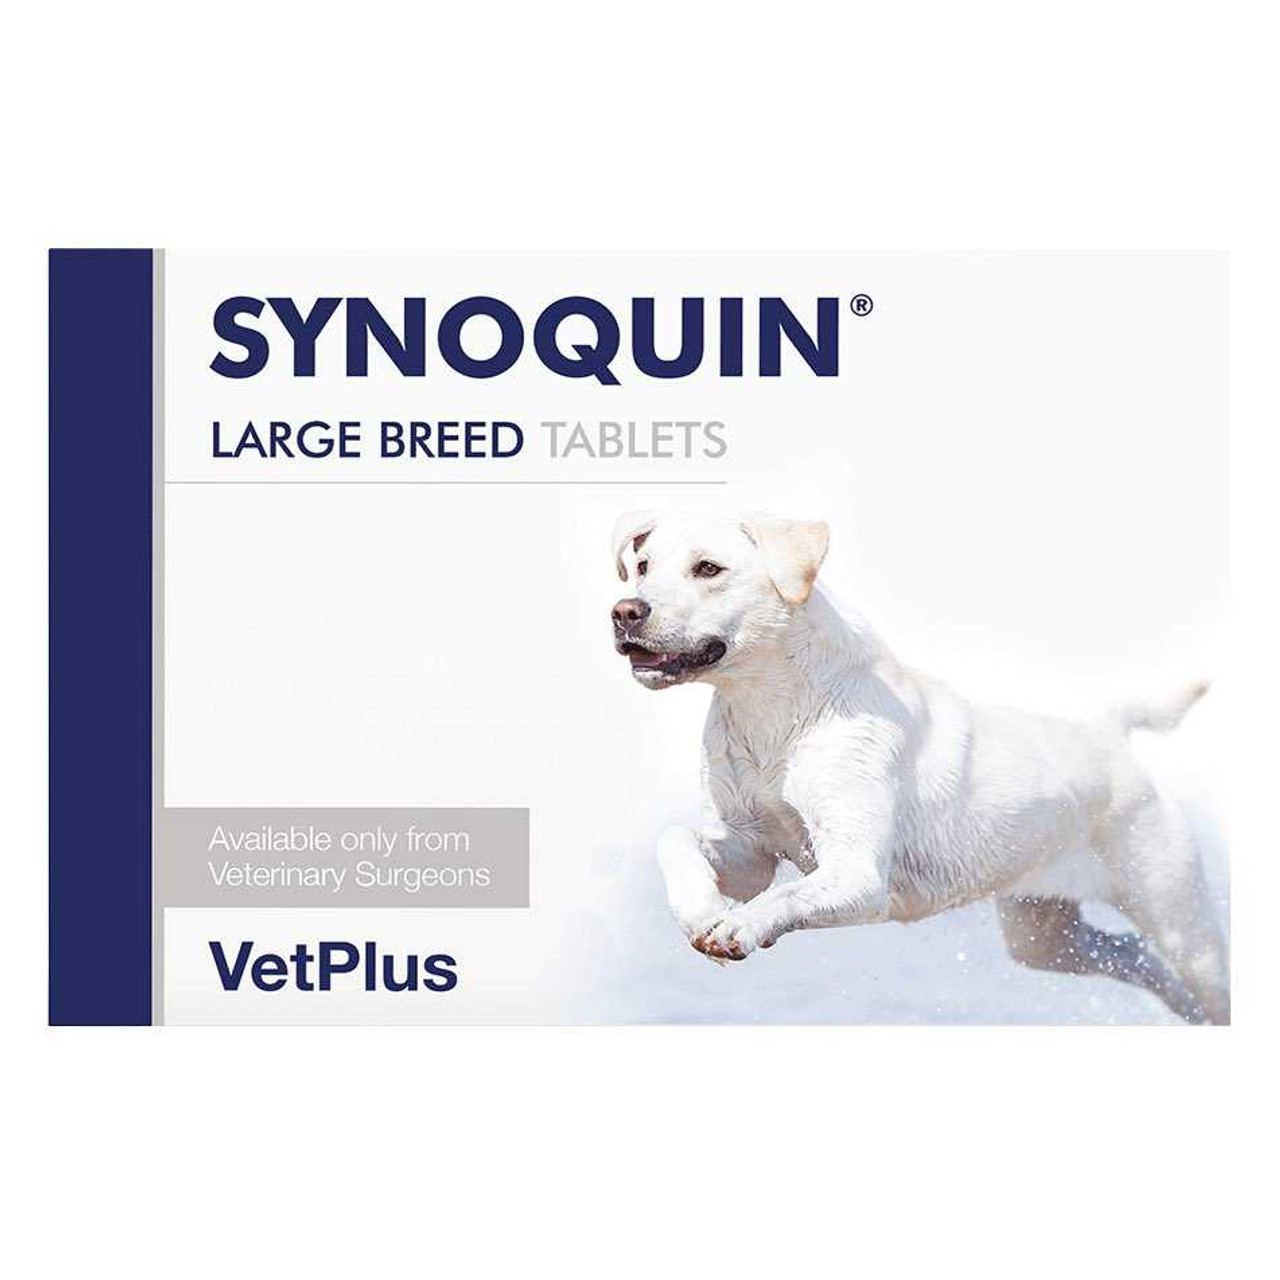 Synoquin Joint Support Tablets for Dogs : Soins articulaires avancés avec EFA